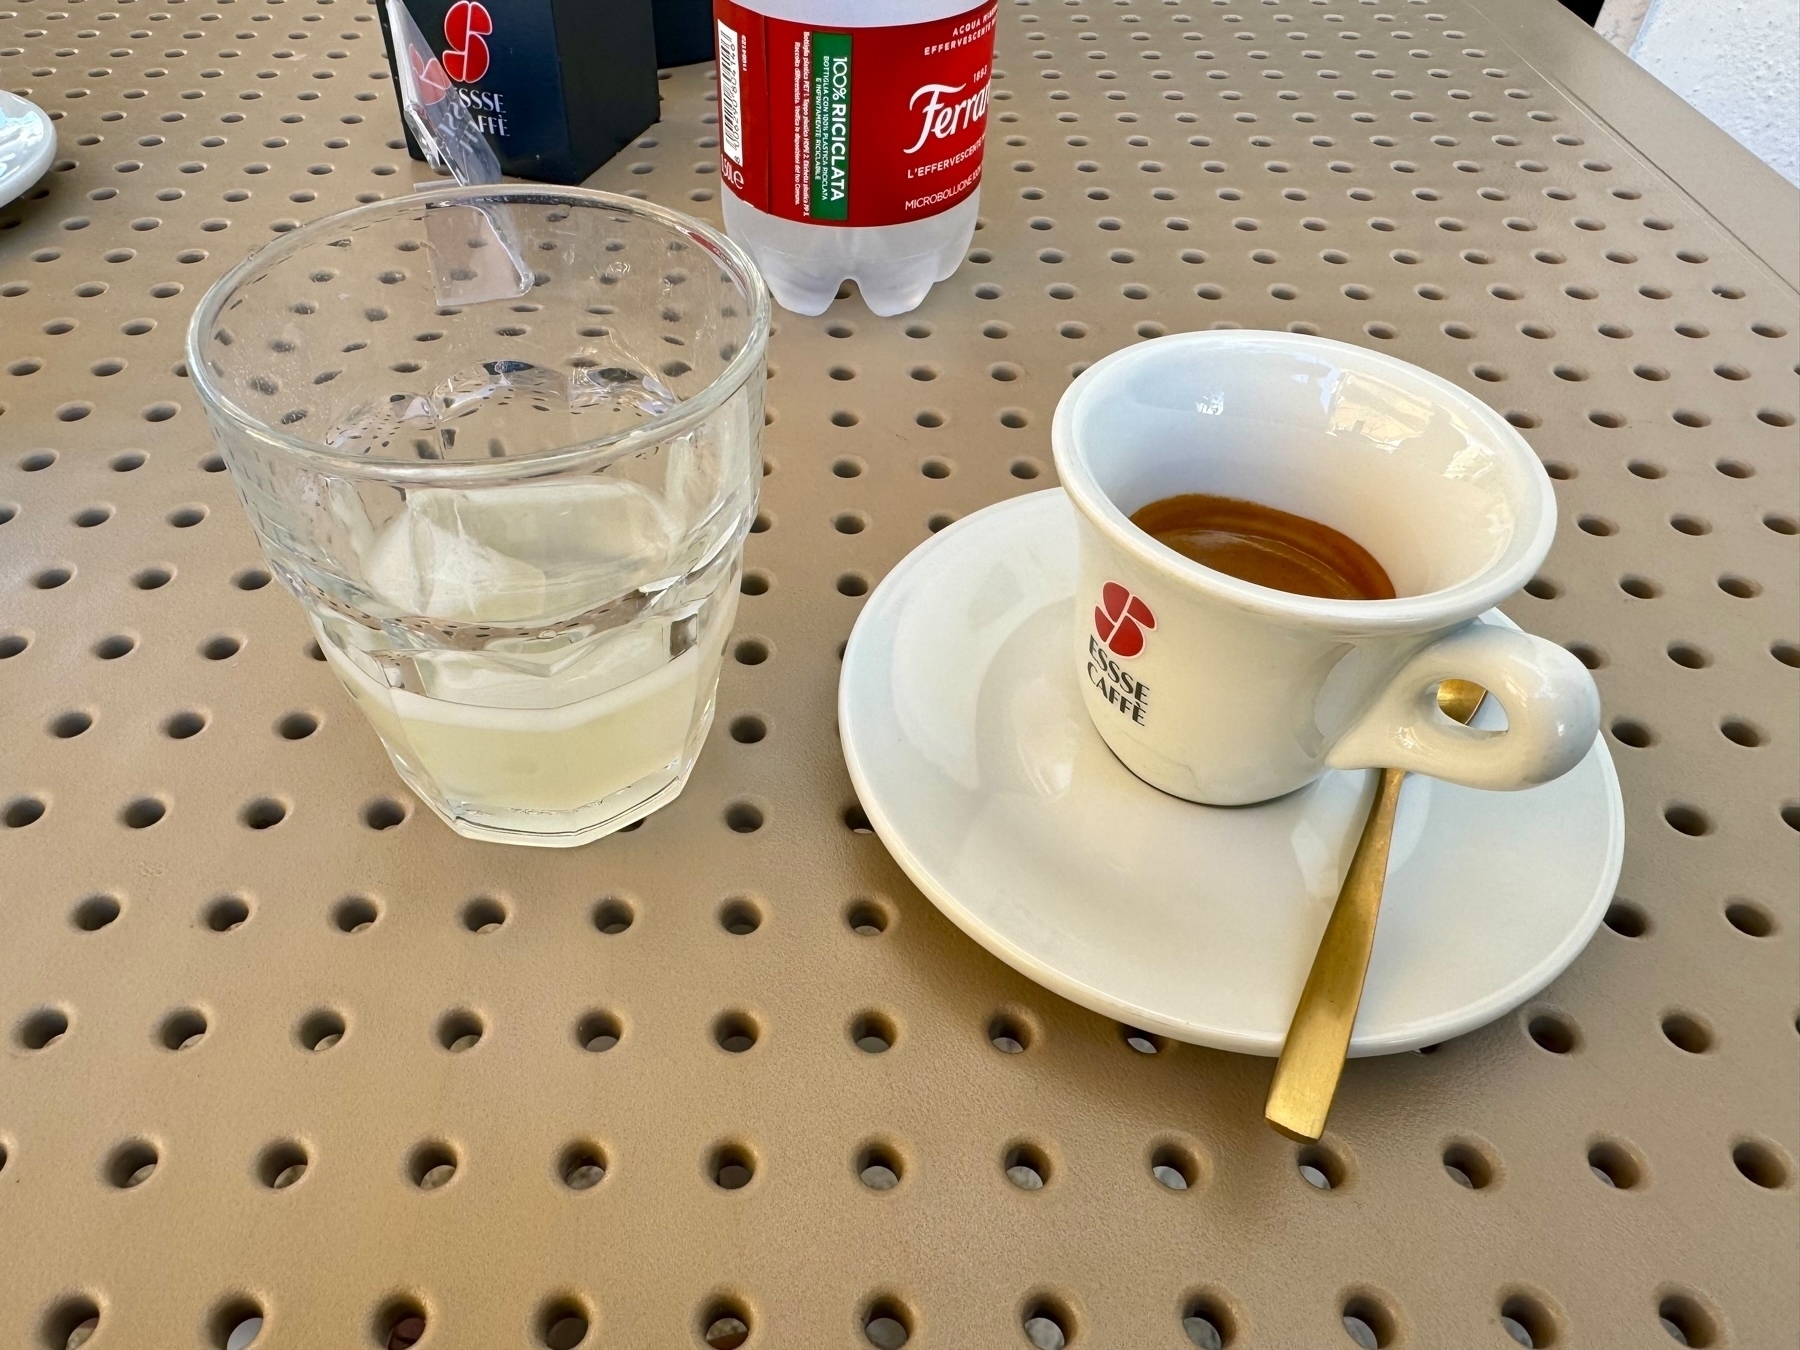 The image shows a glass of almond syrup with ice, a cup of espresso on a saucer with a spoon, and a bottle of water labeled “Ferrarelle.” They are placed on a beige perforated table.